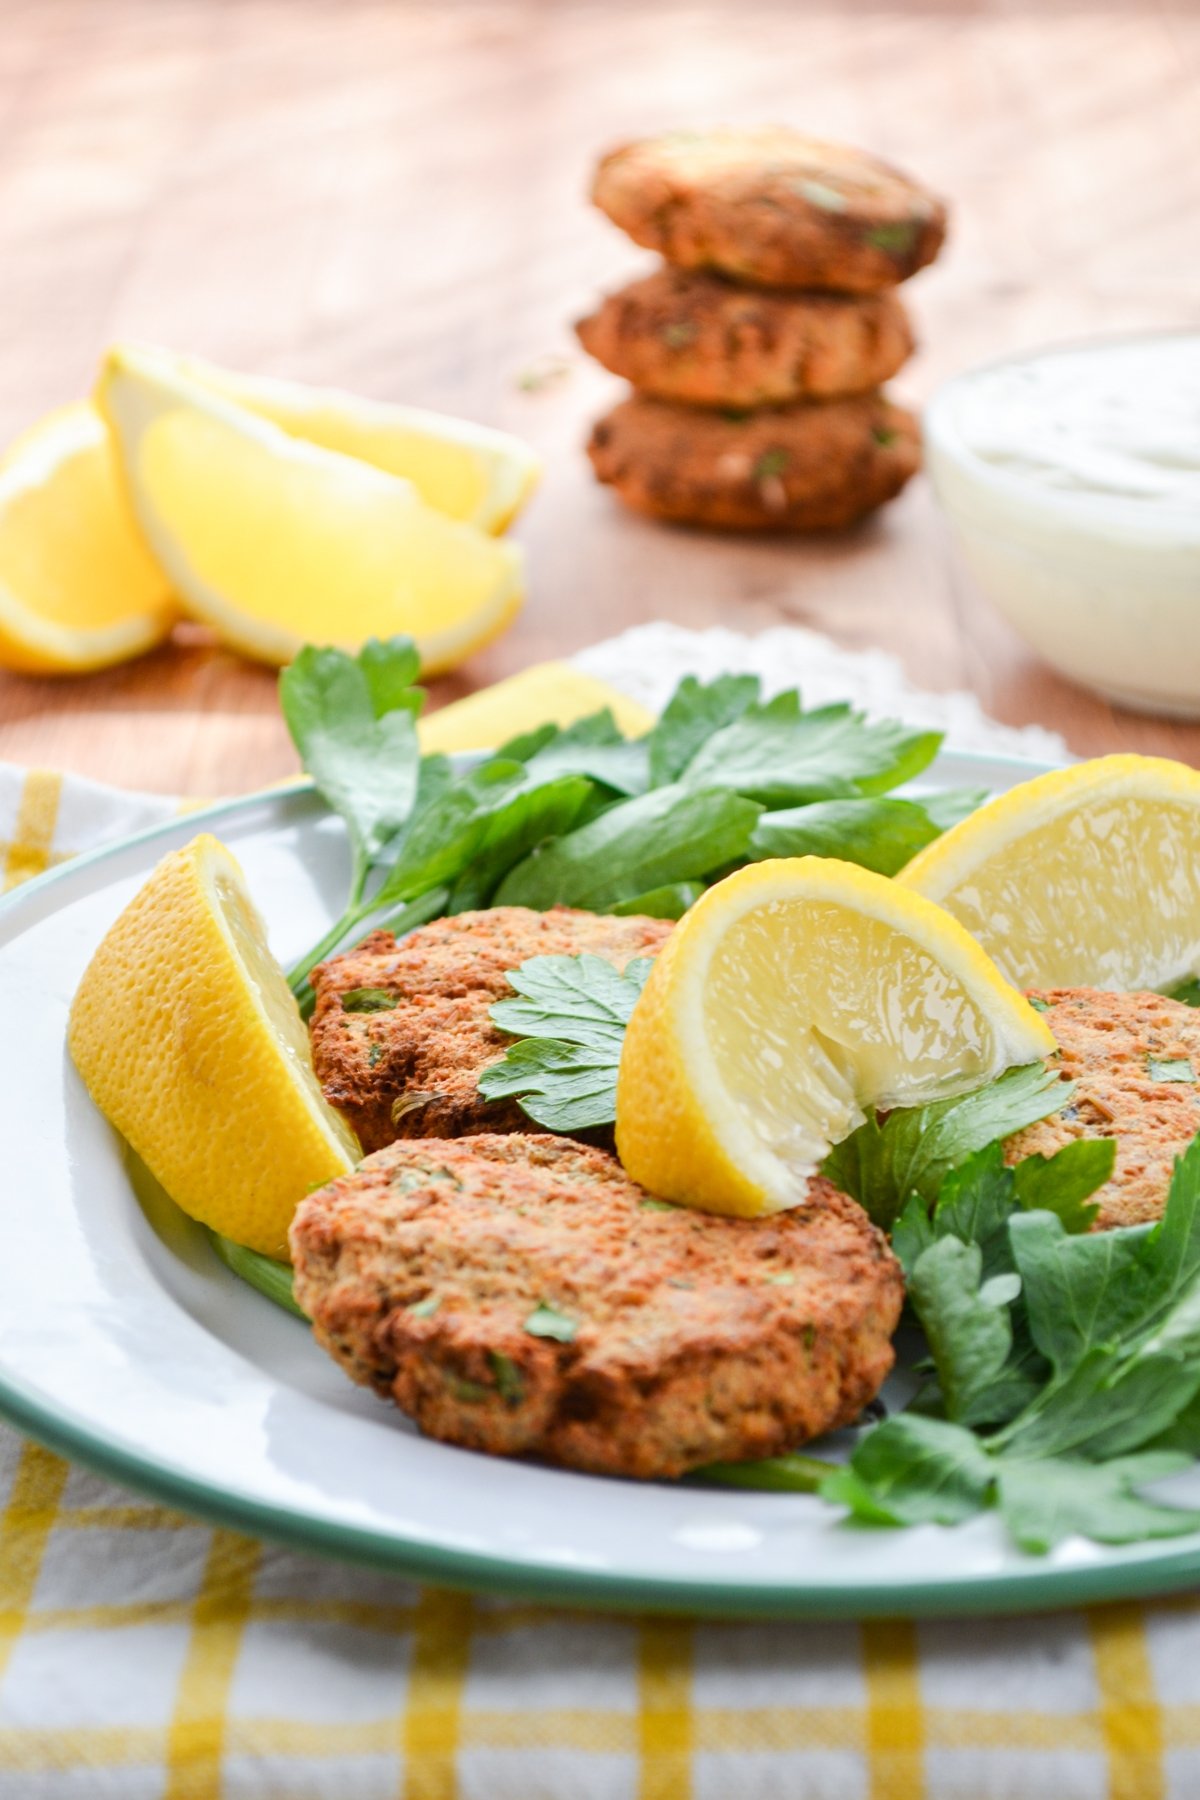 Salmon patties, served on a plate and garnished with fresh parsley and lemon wedges.